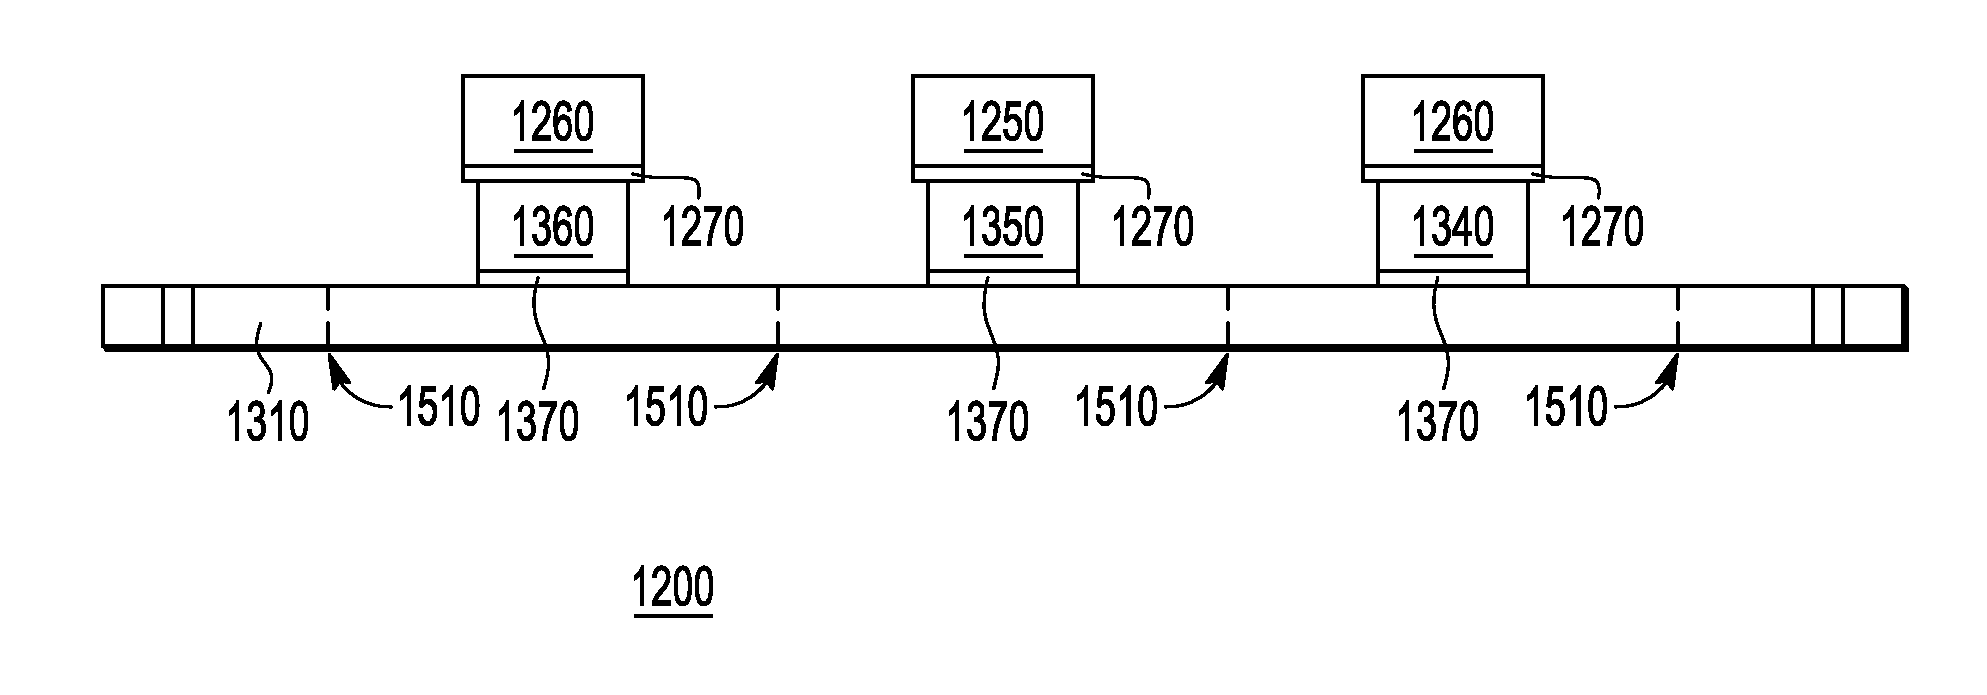 Method and system for wafer and strip level batch die attach assembly